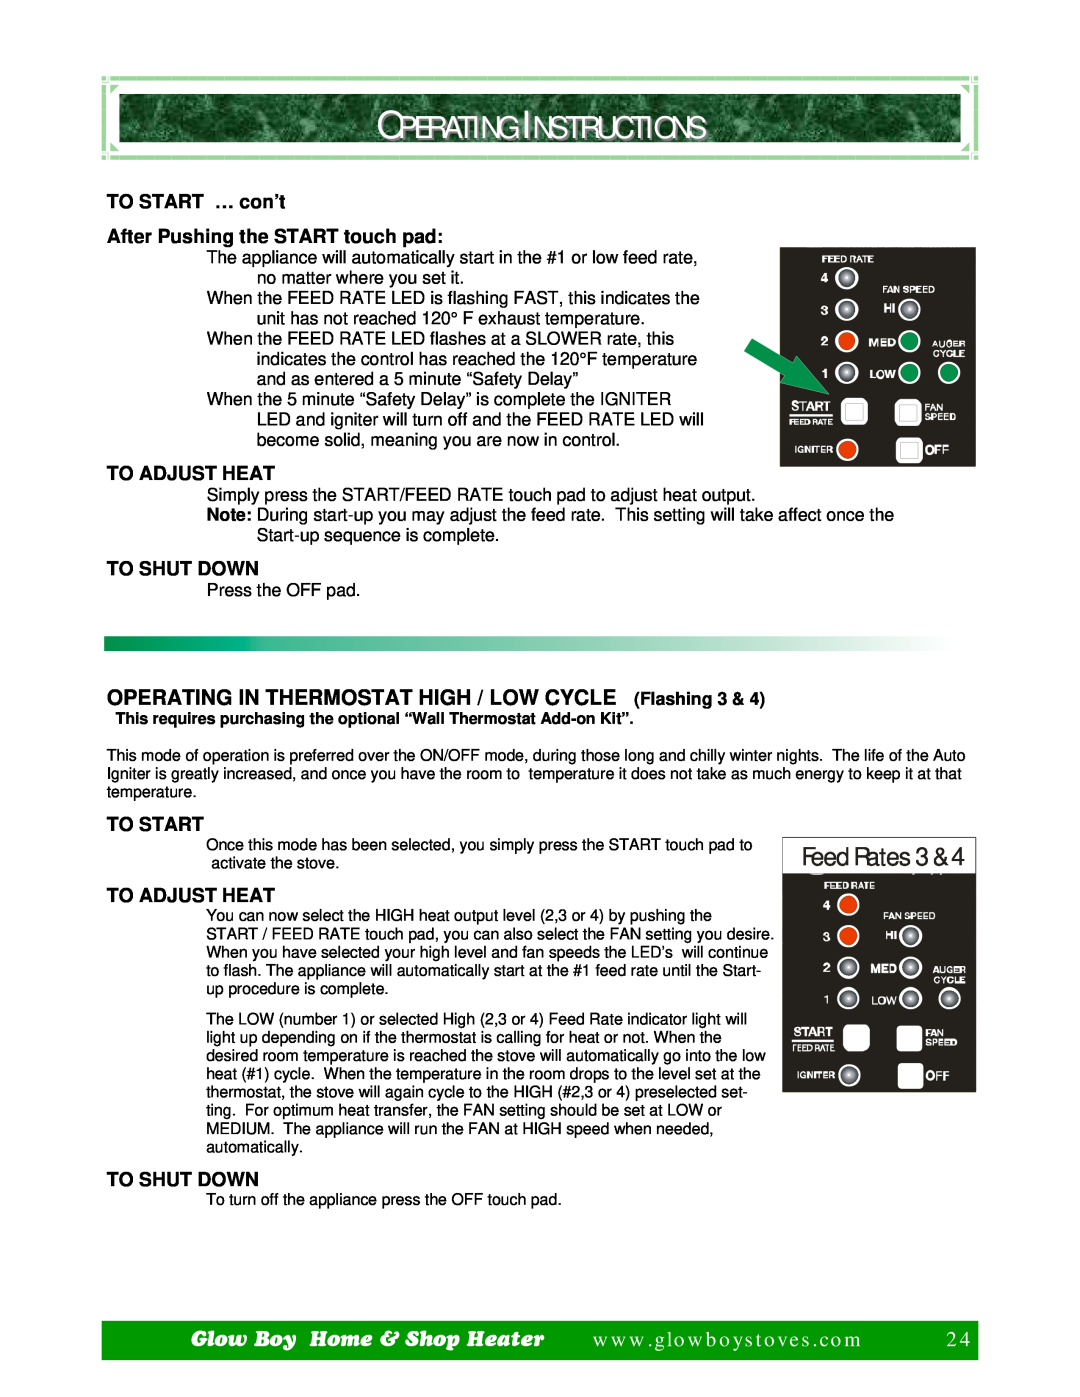 Dansons Group CCGB 2 Operating Instructions, Feed Rates, TO START … con’t, After Pushing the START touch pad, To Shut Down 